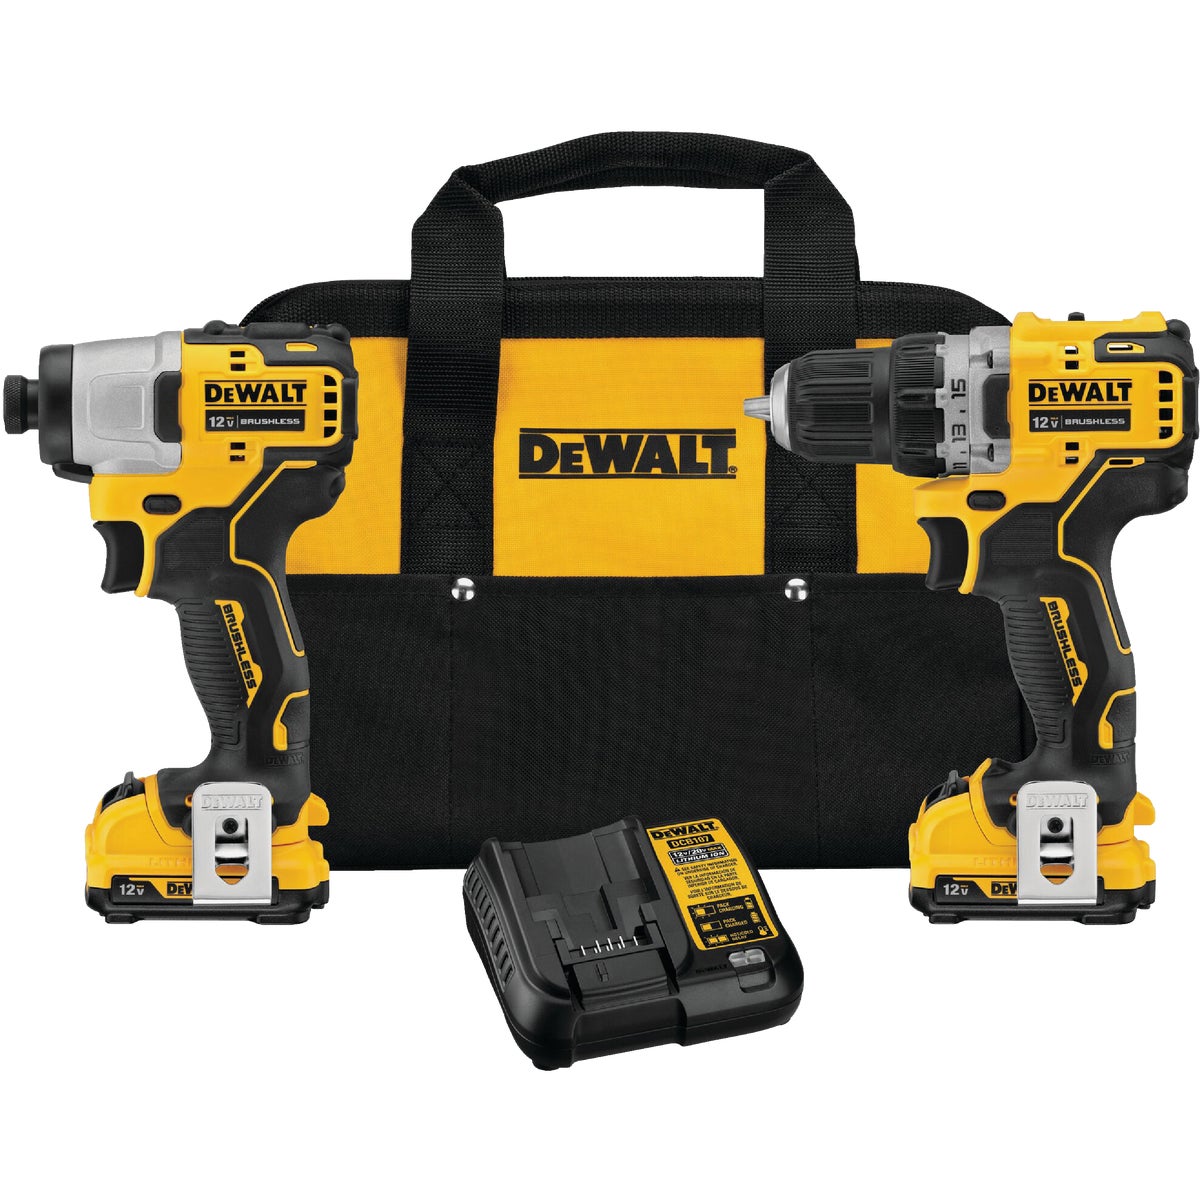 DEWALT XTREME 2-Tool 12 Volt MAX Lithium-Ion Brushless Drill & Impact Driver Cordless Tool Combo Kit